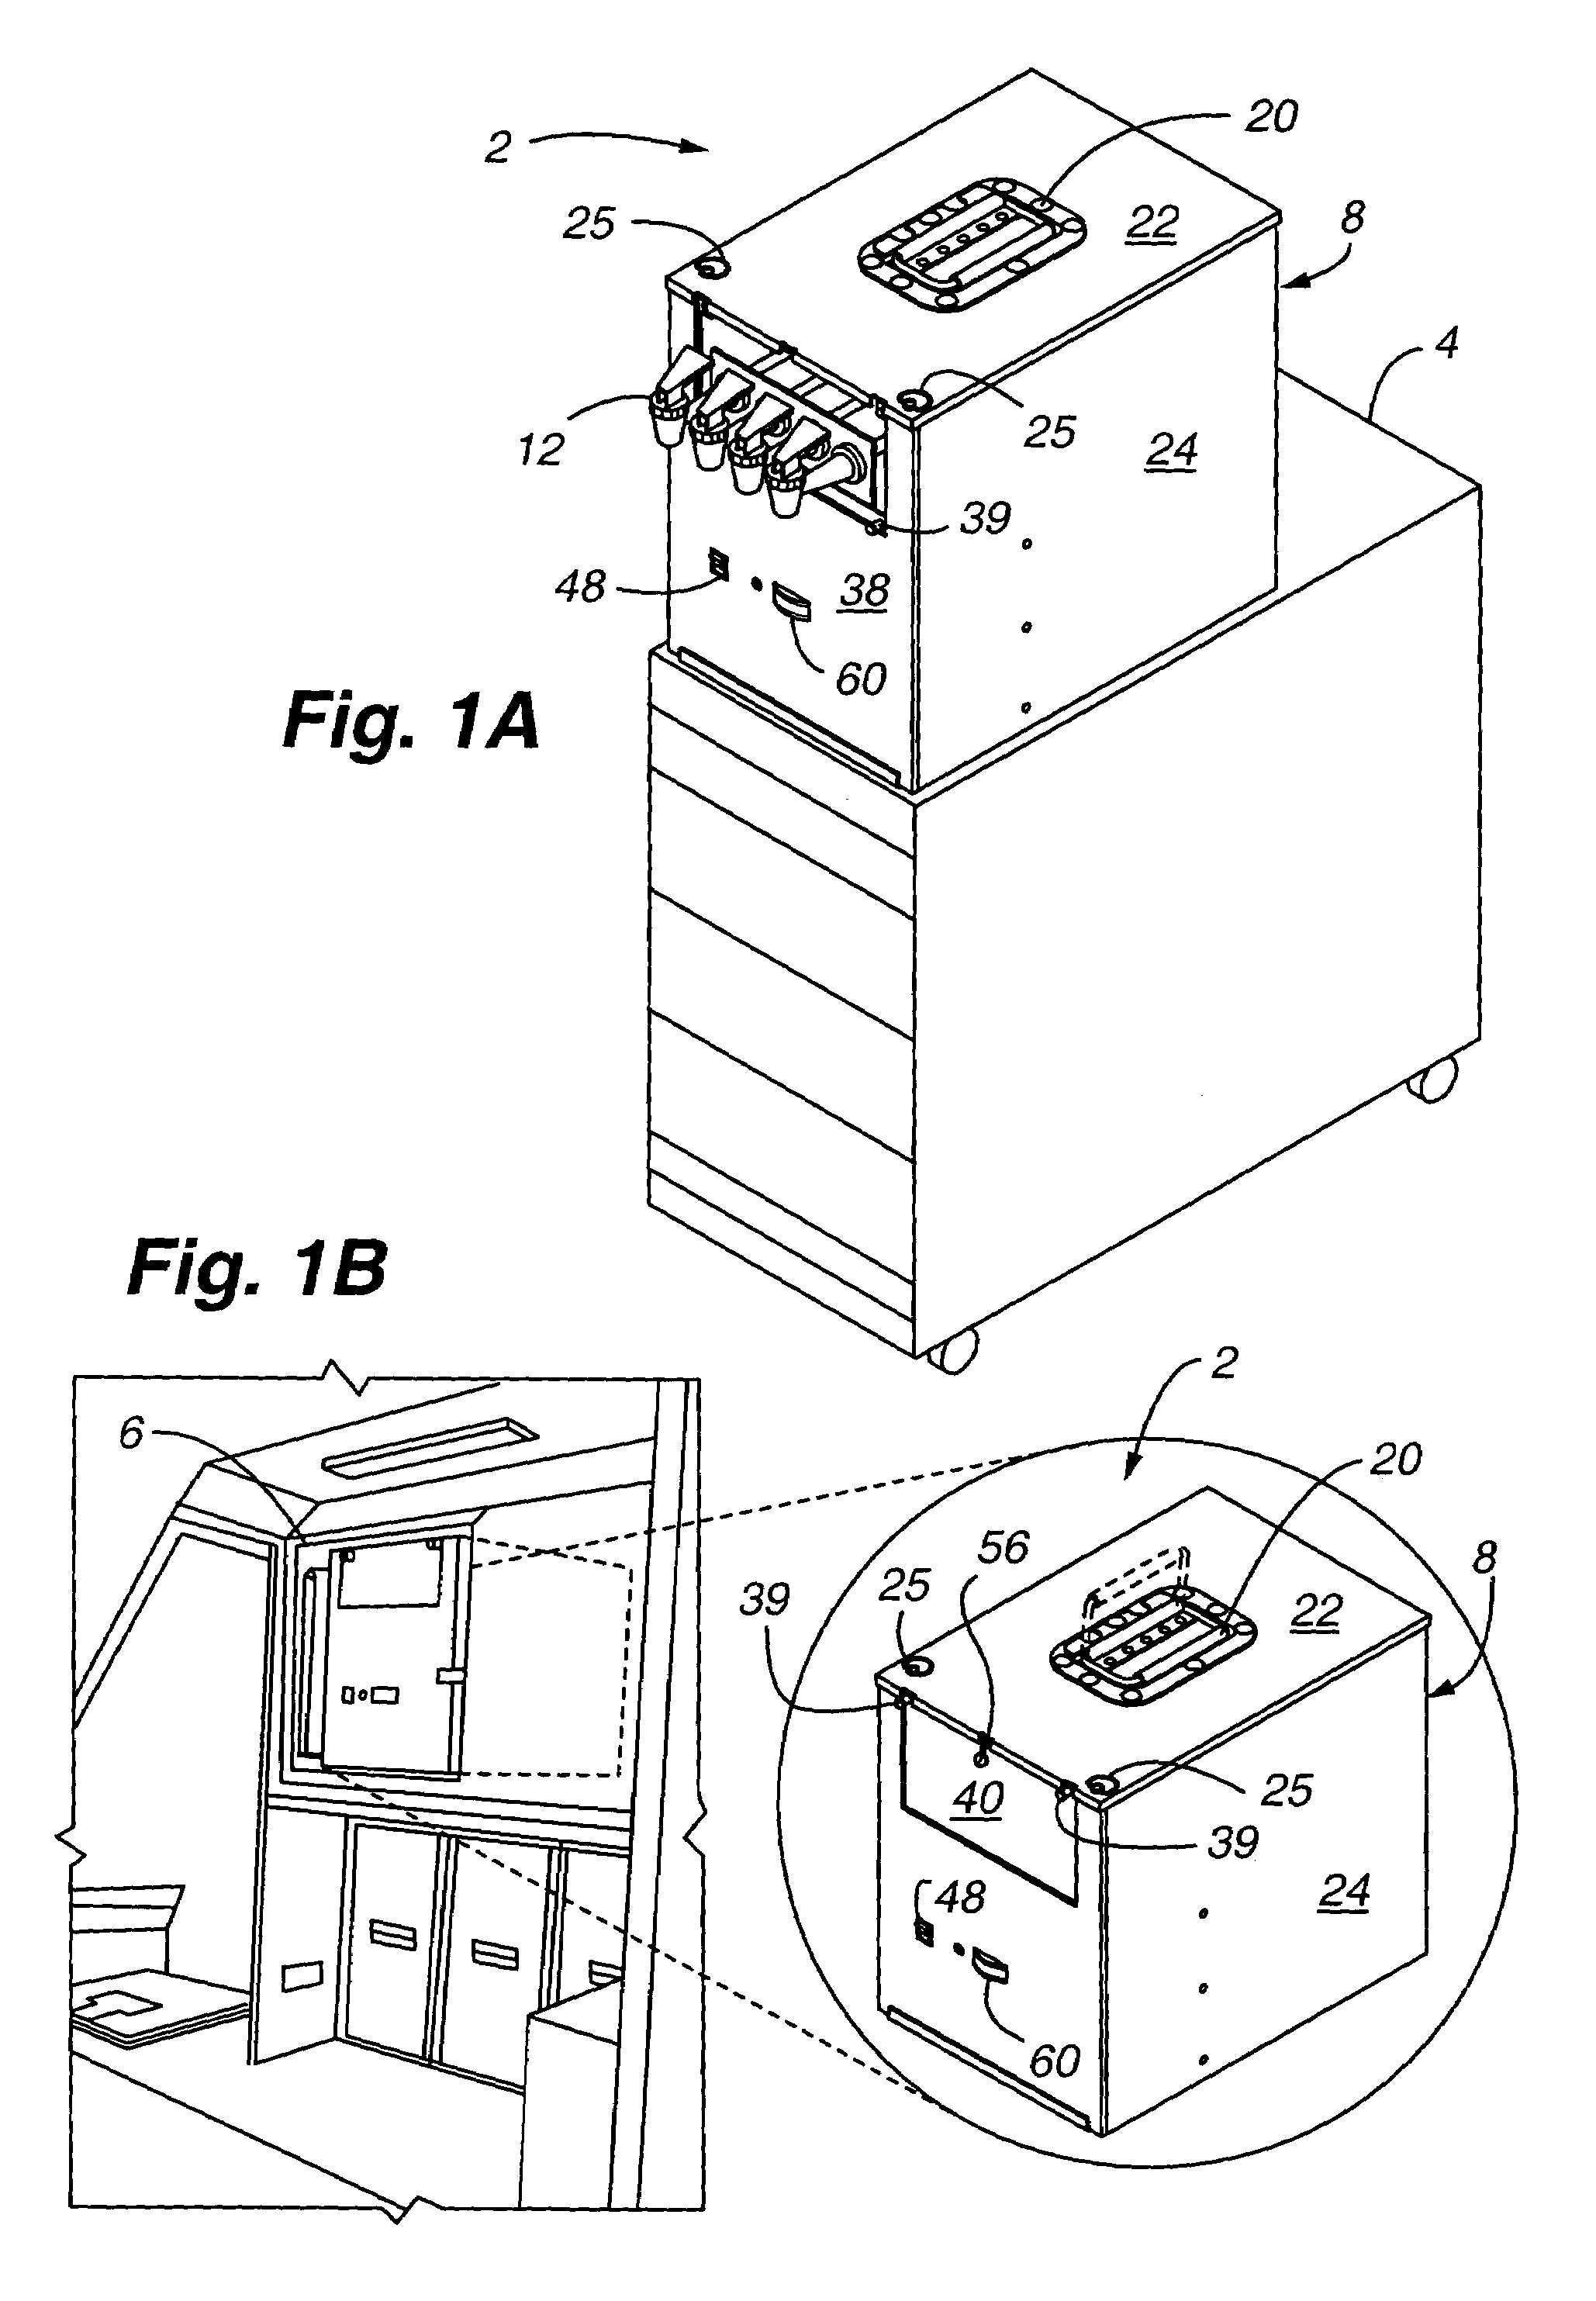 Self-contained beverage dispensing apparatus